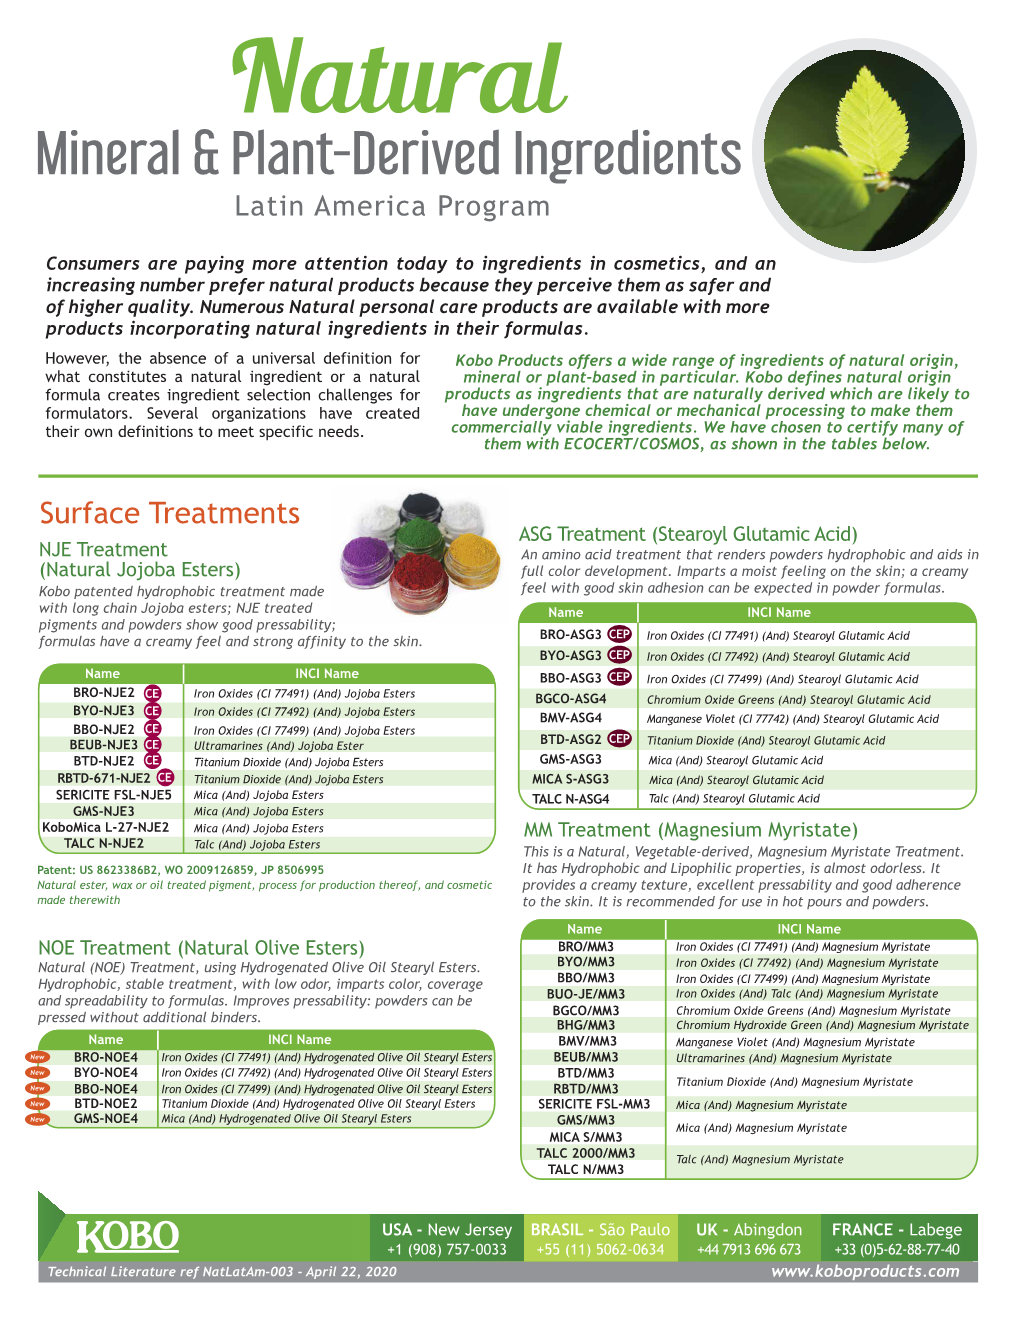 Natural, Mineral & Plant-Derived Ingredients